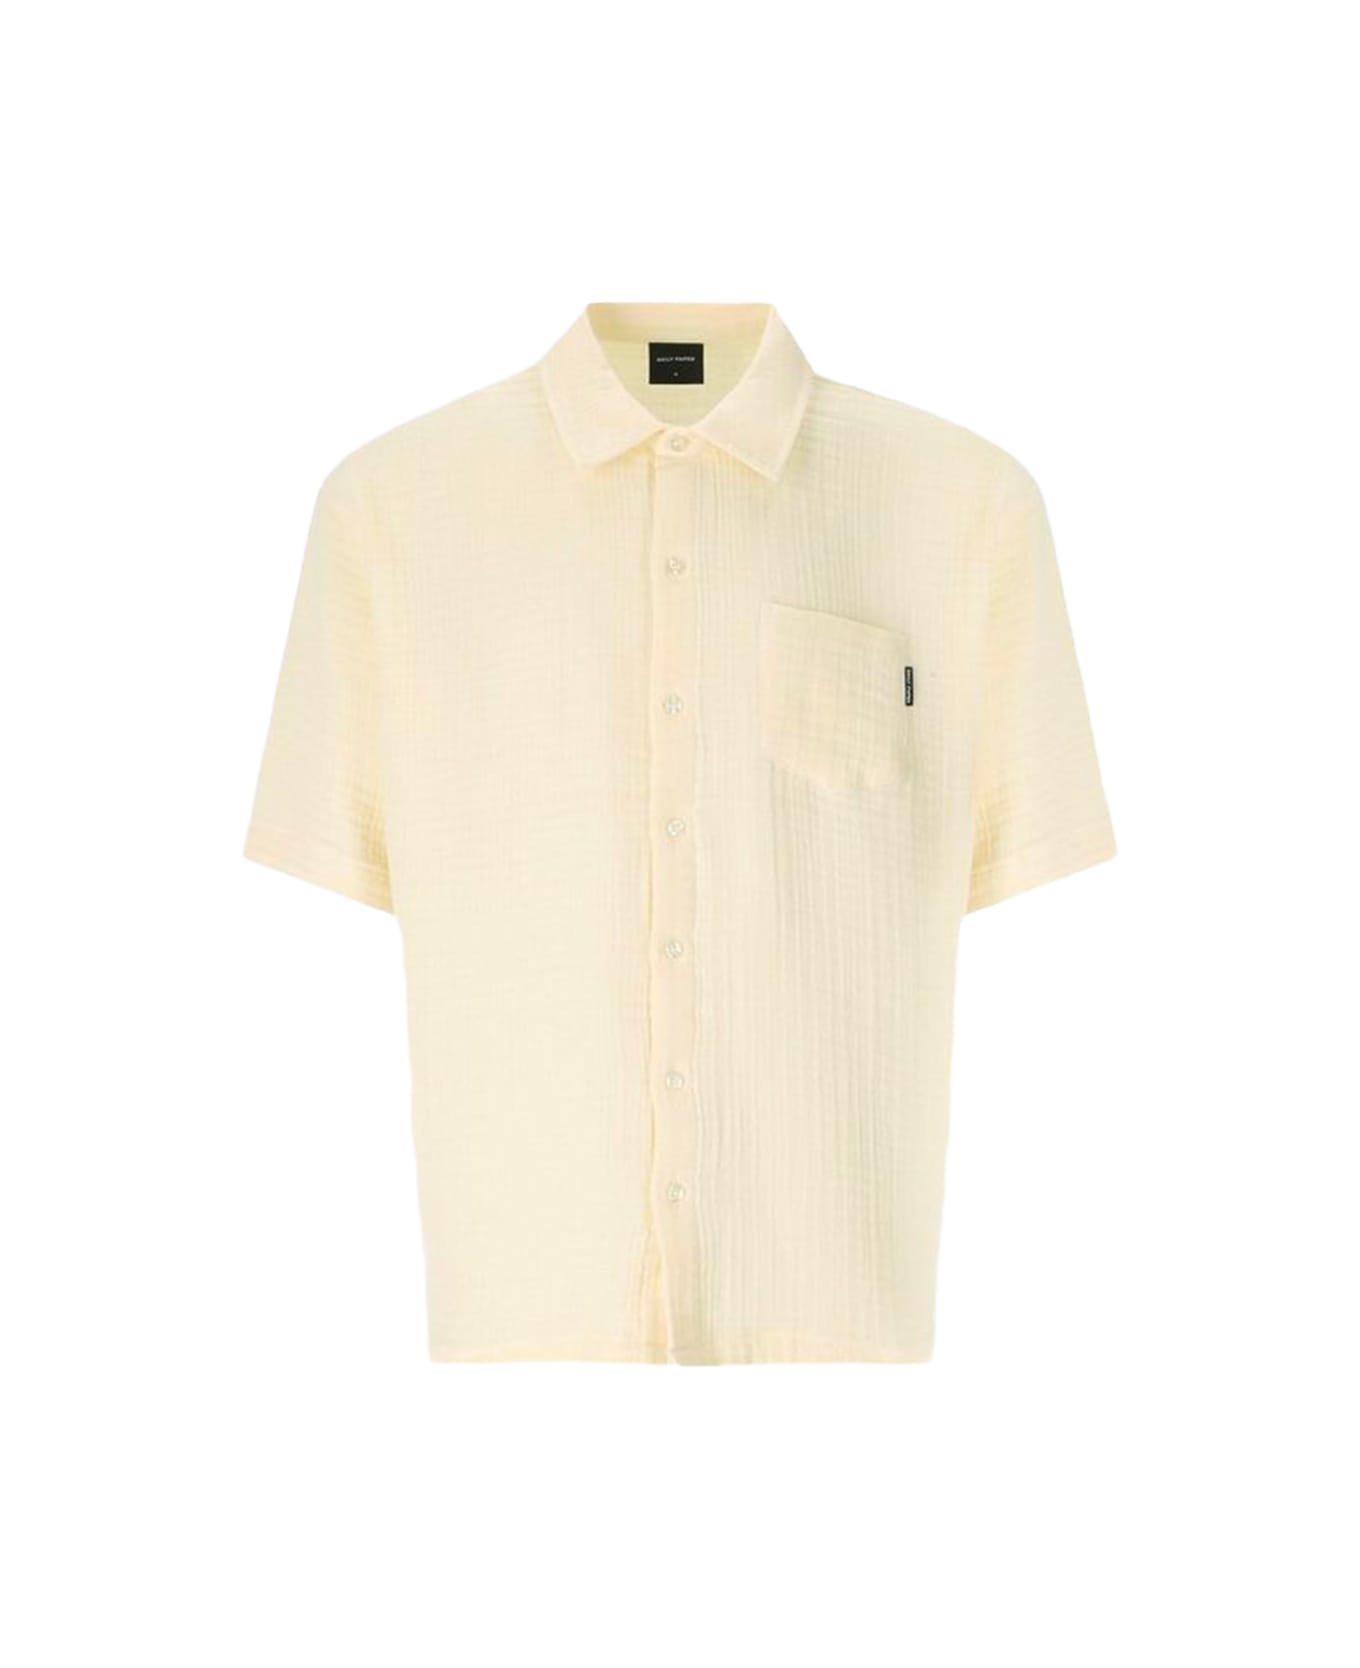 Daily Paper Yellow Cotton Shirt - ICING YELLOW